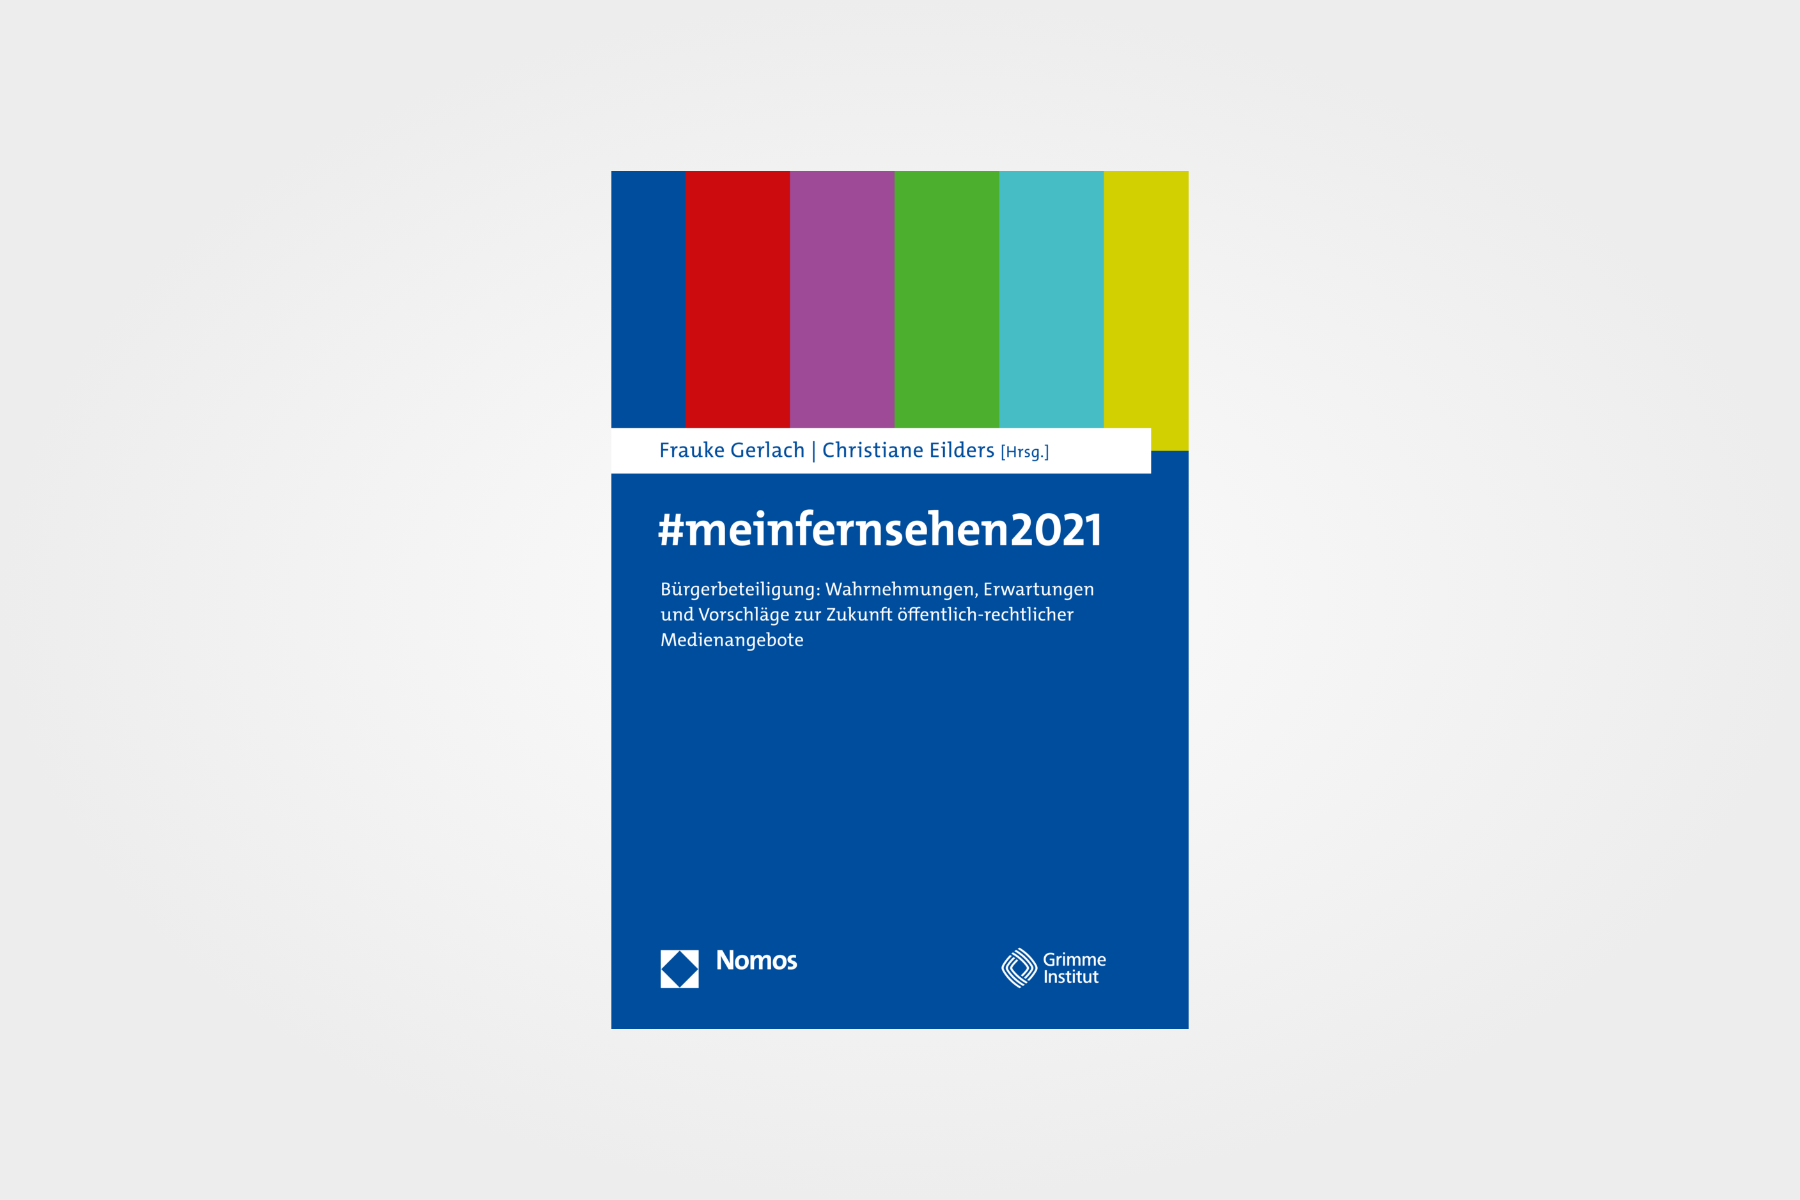 #meinfernsehen2021 (#mytv2021) - The perspective of young people